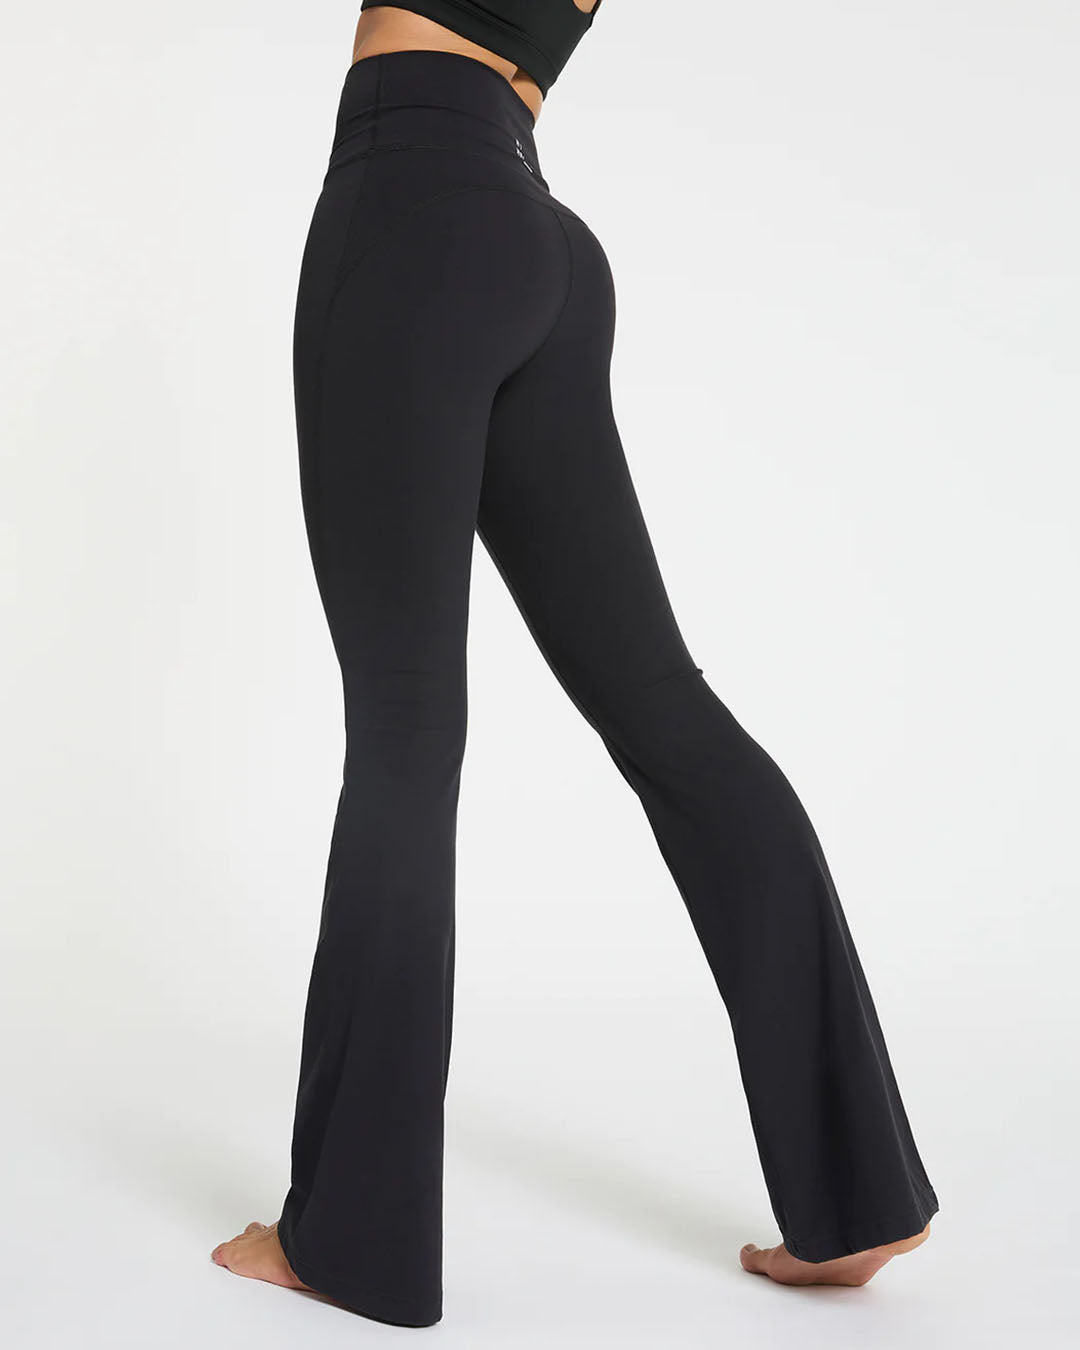 In Motion Flare Pant - Black